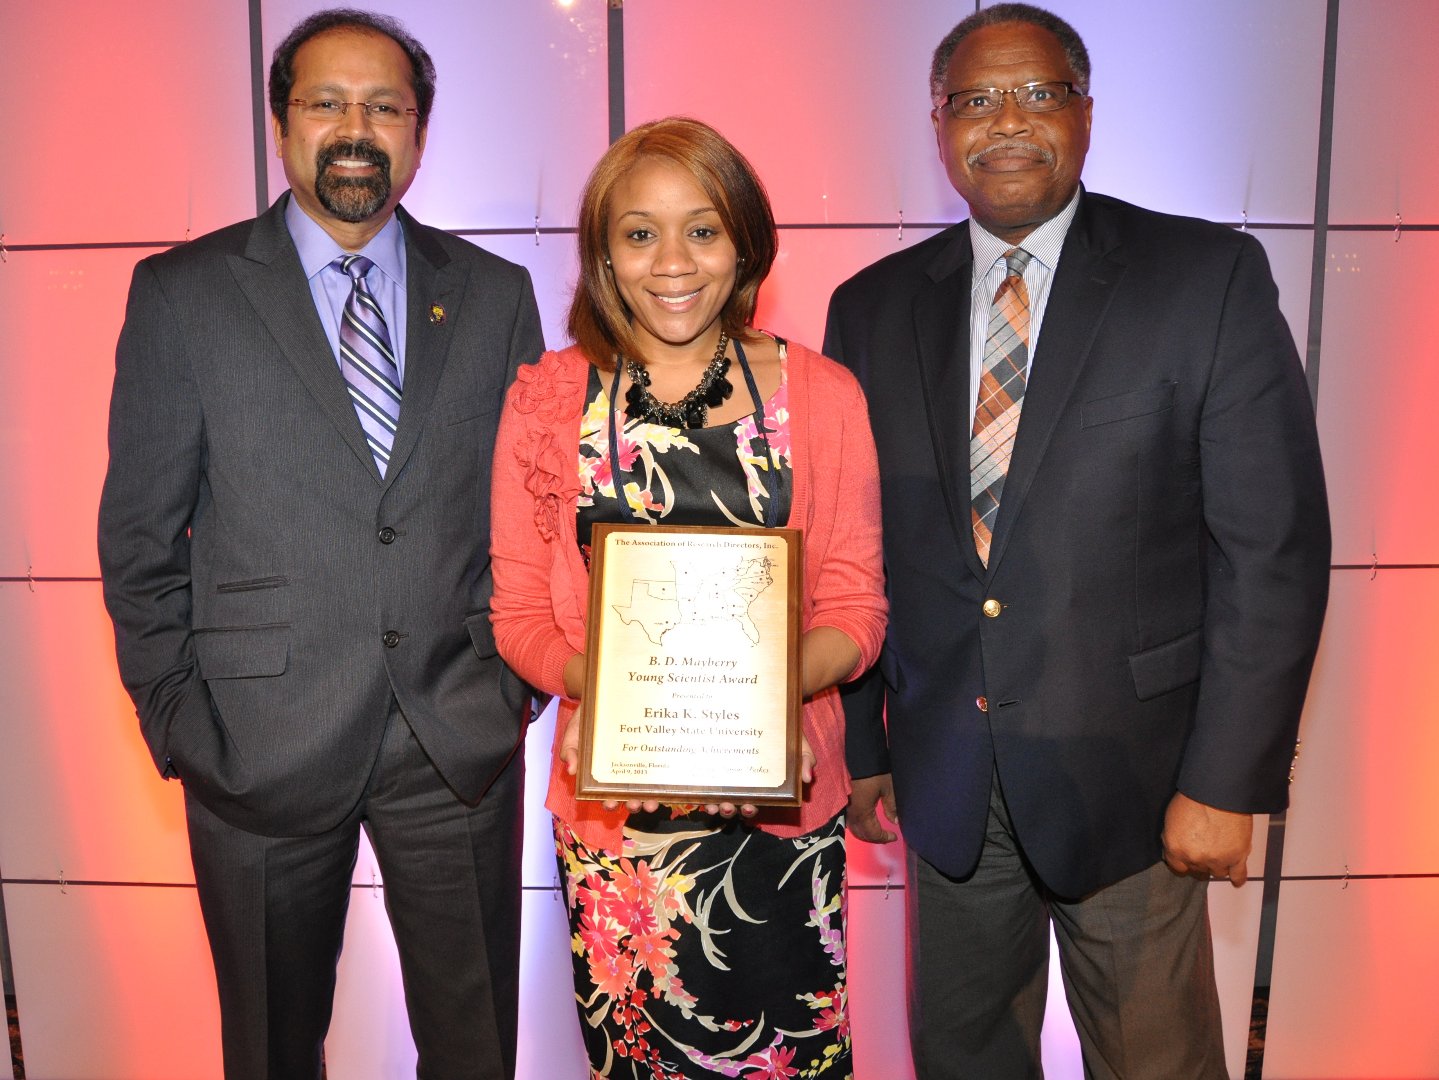 Dr. Erika Styles received the B.D. Mayberry Young Scientist Award at the Association of Research Directors’ 17th Biennial Research Symposium in 2013.